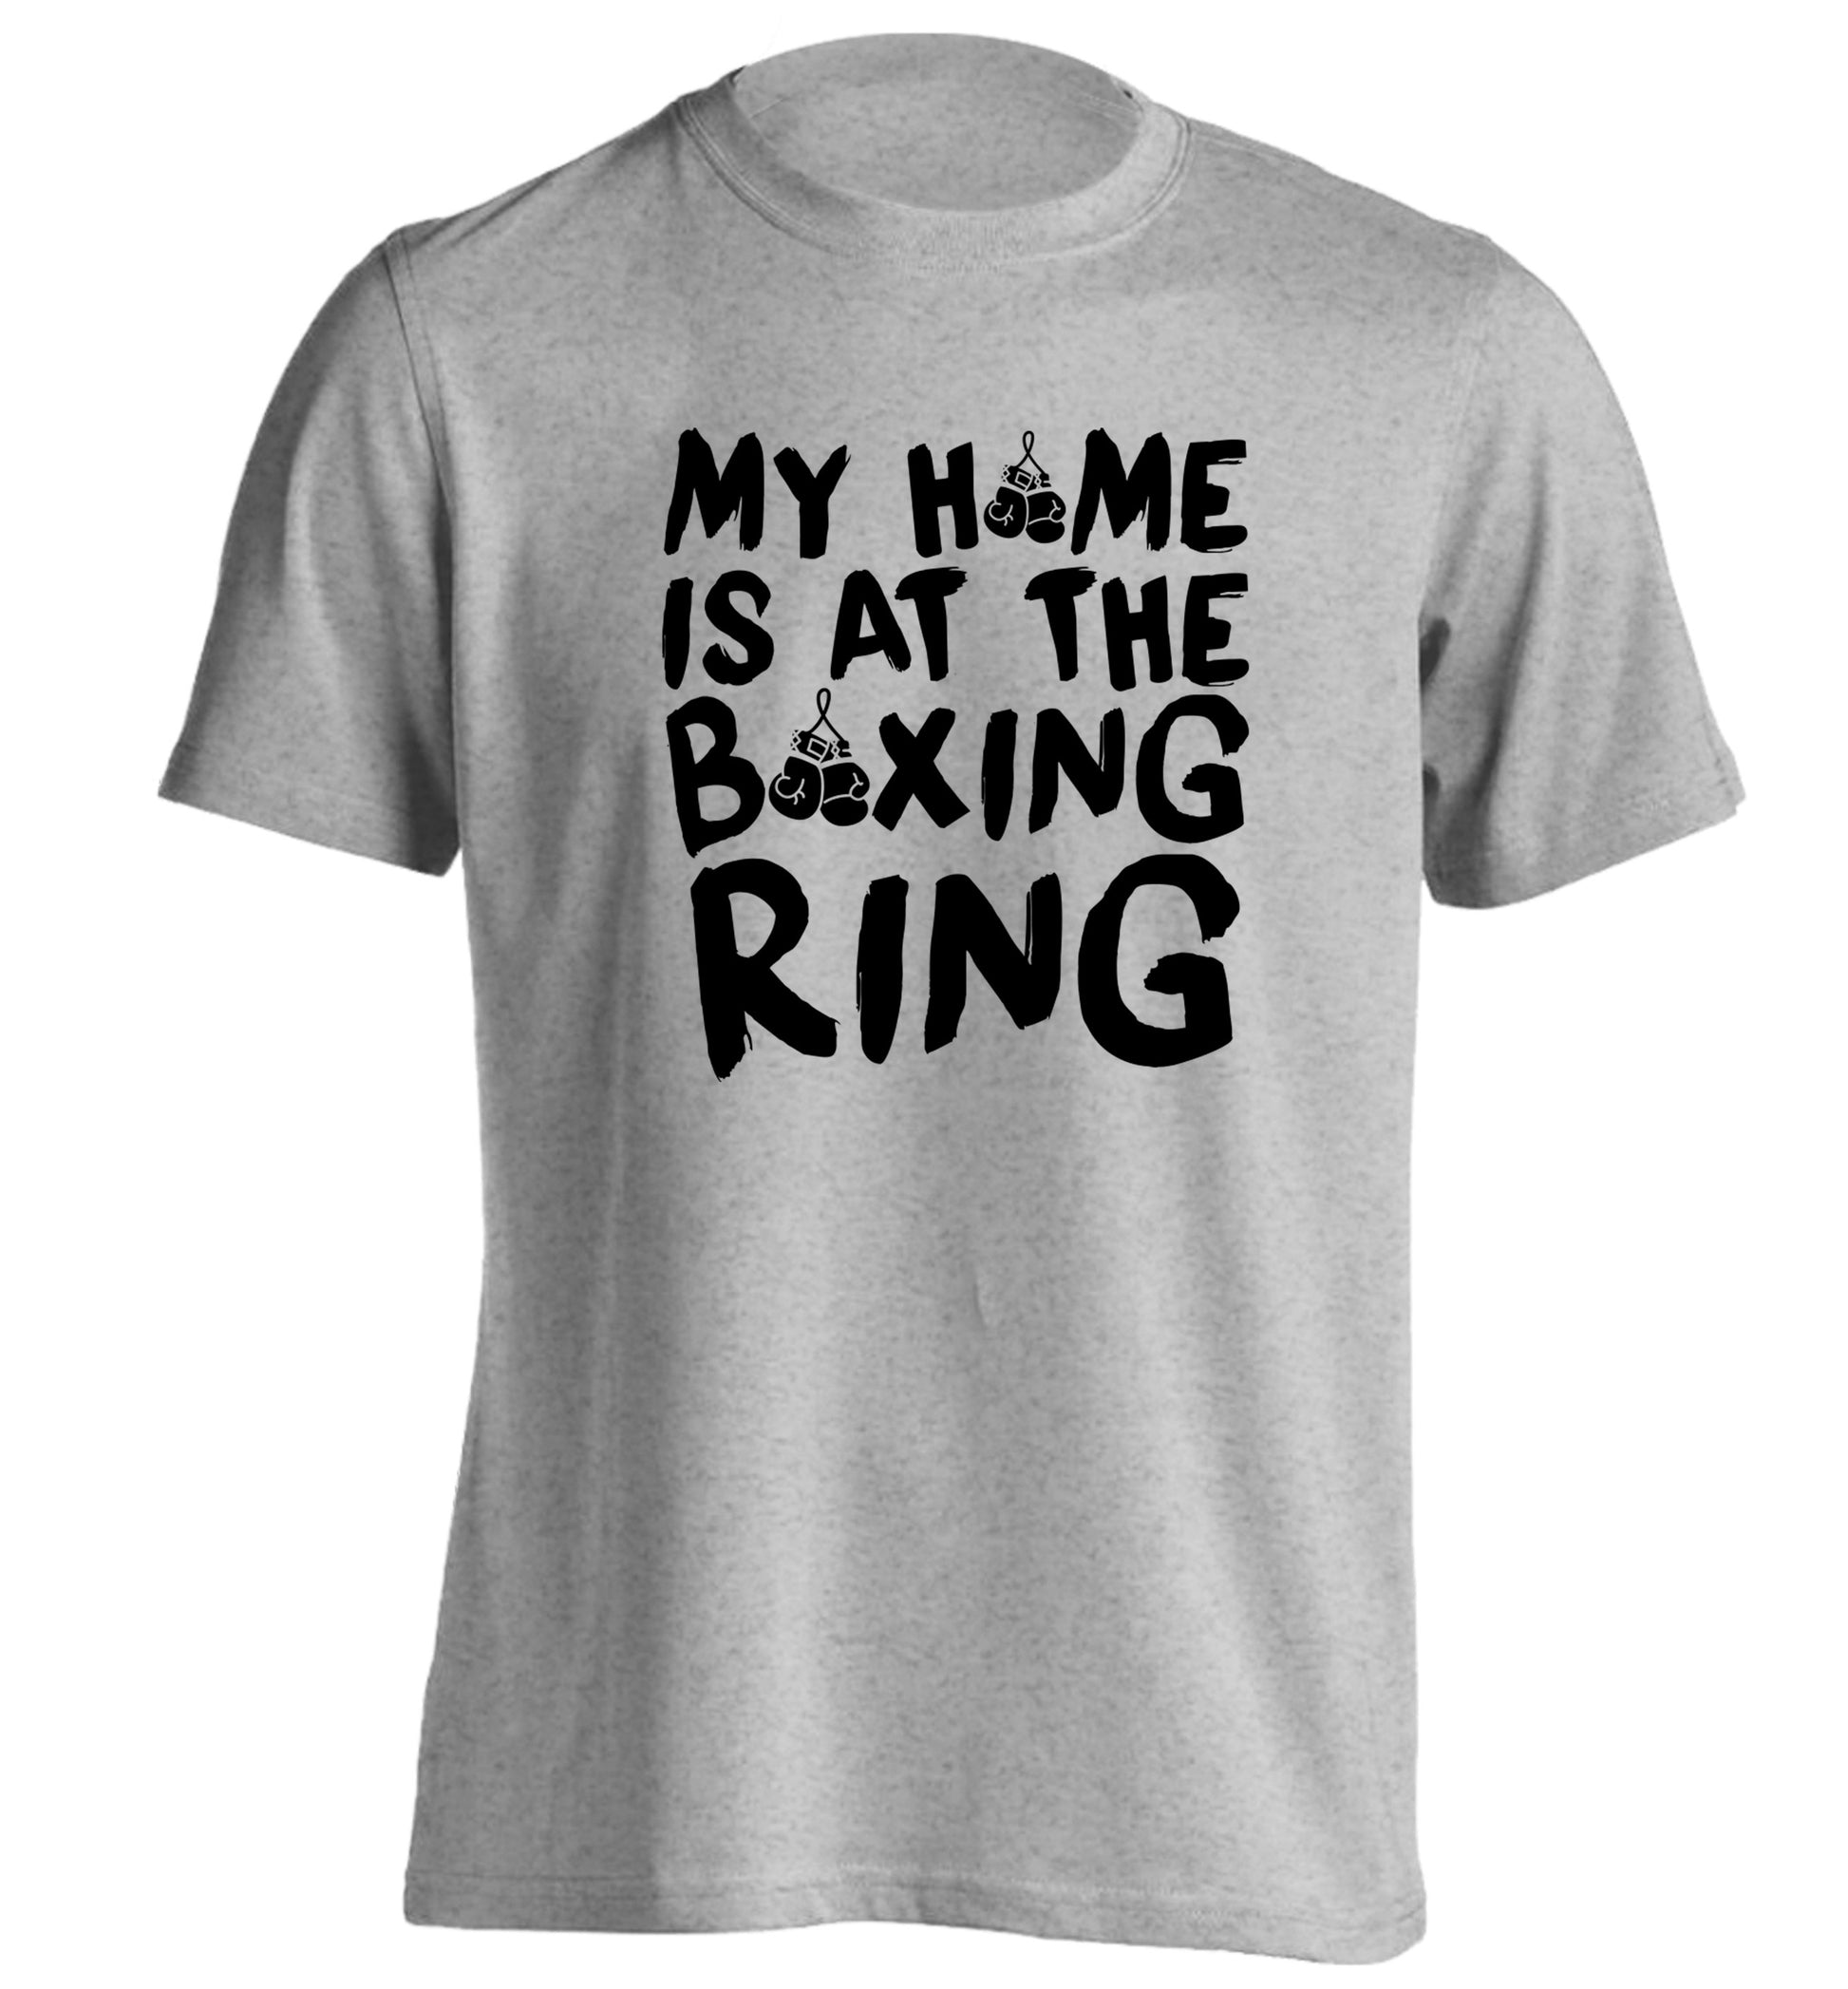 My home is at the boxing ring adults unisex grey Tshirt 2XL